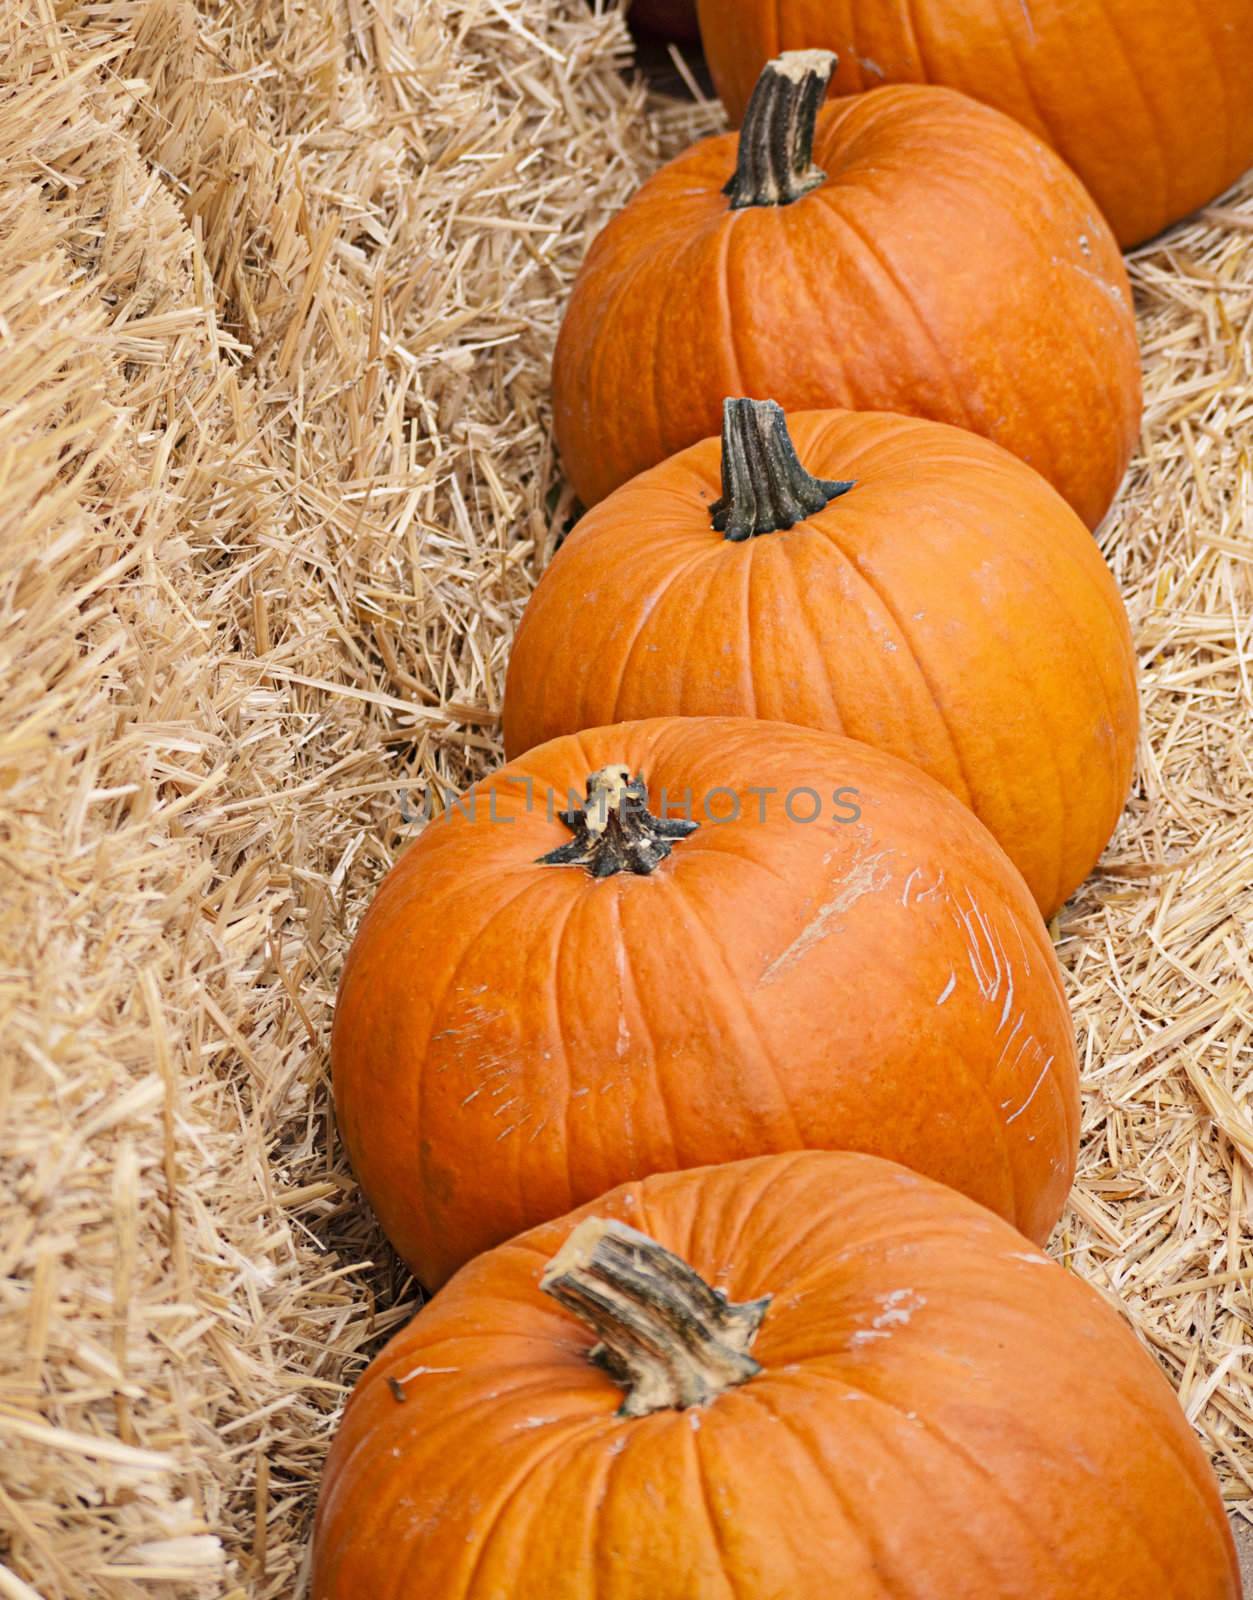 Four large pumpkins on a hay bale seen from above. Good for Halloween or Thanksgiving